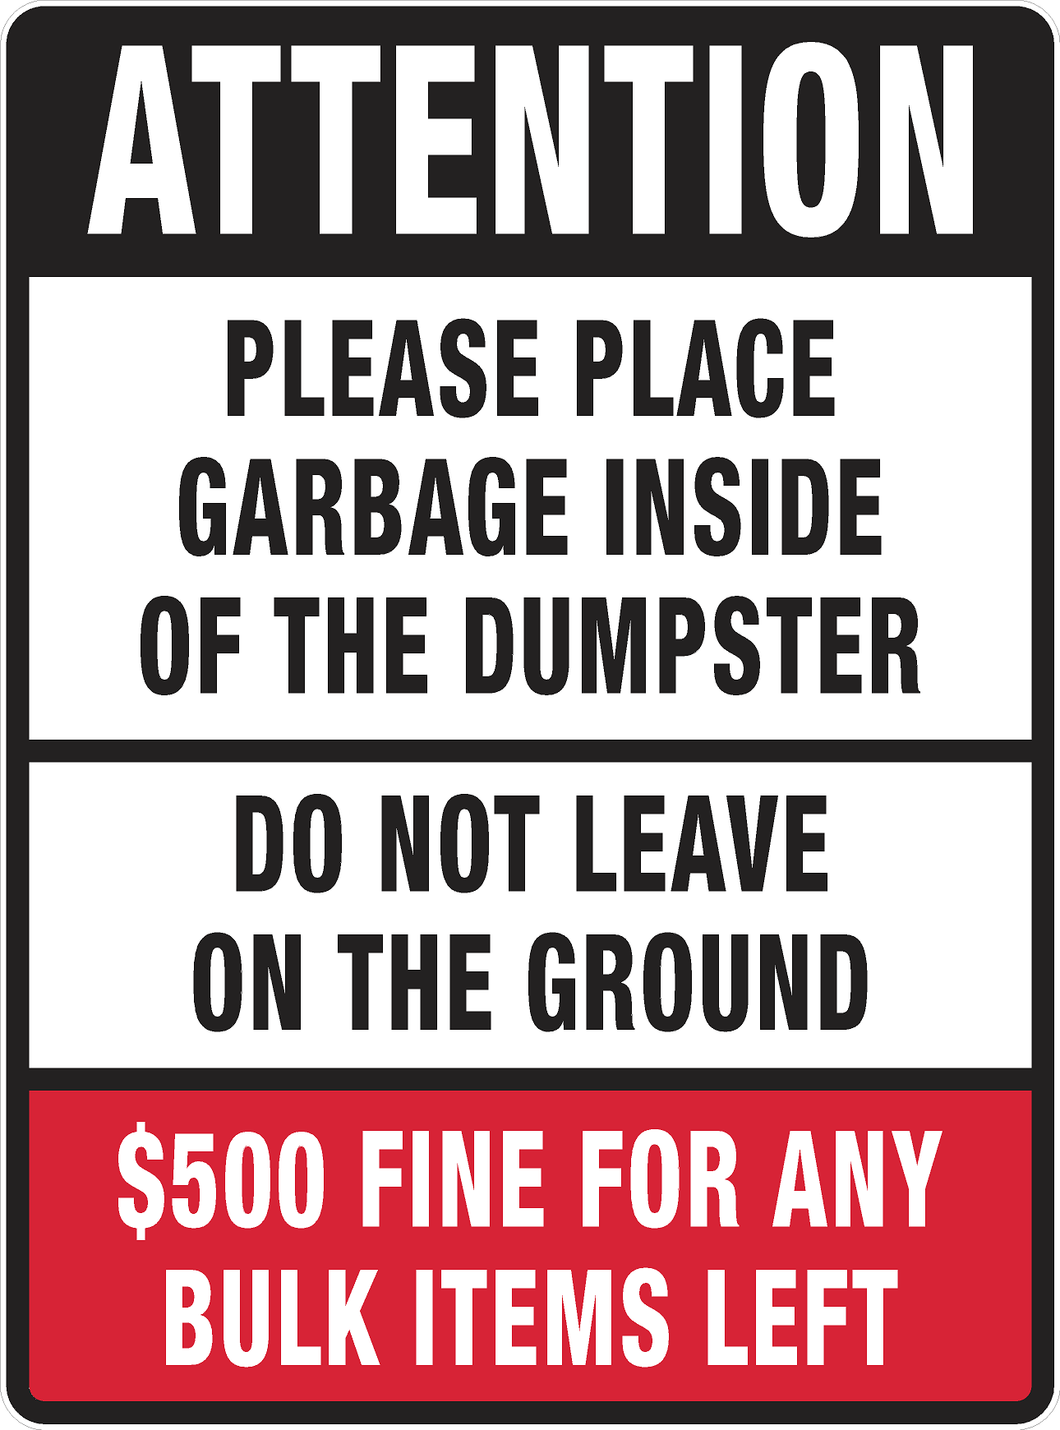 Attention Please Place Garbage Inside Dumpster $500 Fine Sign